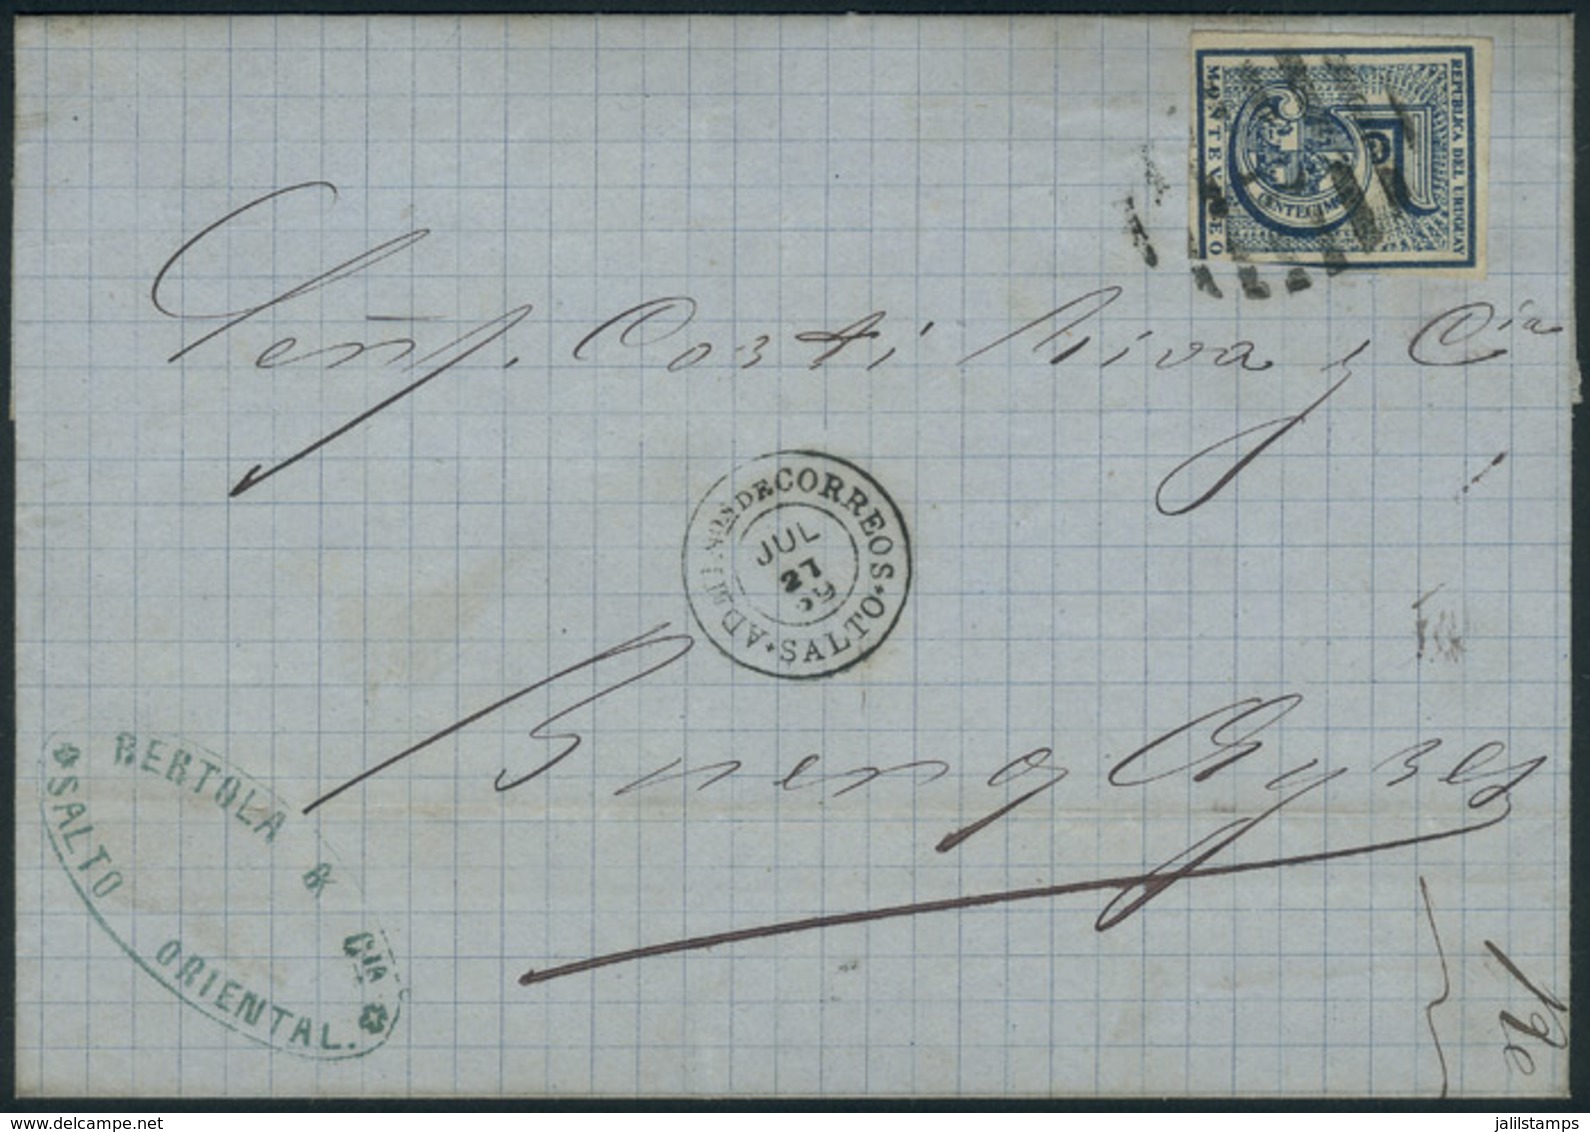 URUGUAY: 27/JUL/1869 SALTO - Buenos Aires: Folded Cover Franked By Sc.30, With Semi-mute "B" Barred Oval Cancel And Date - Uruguay